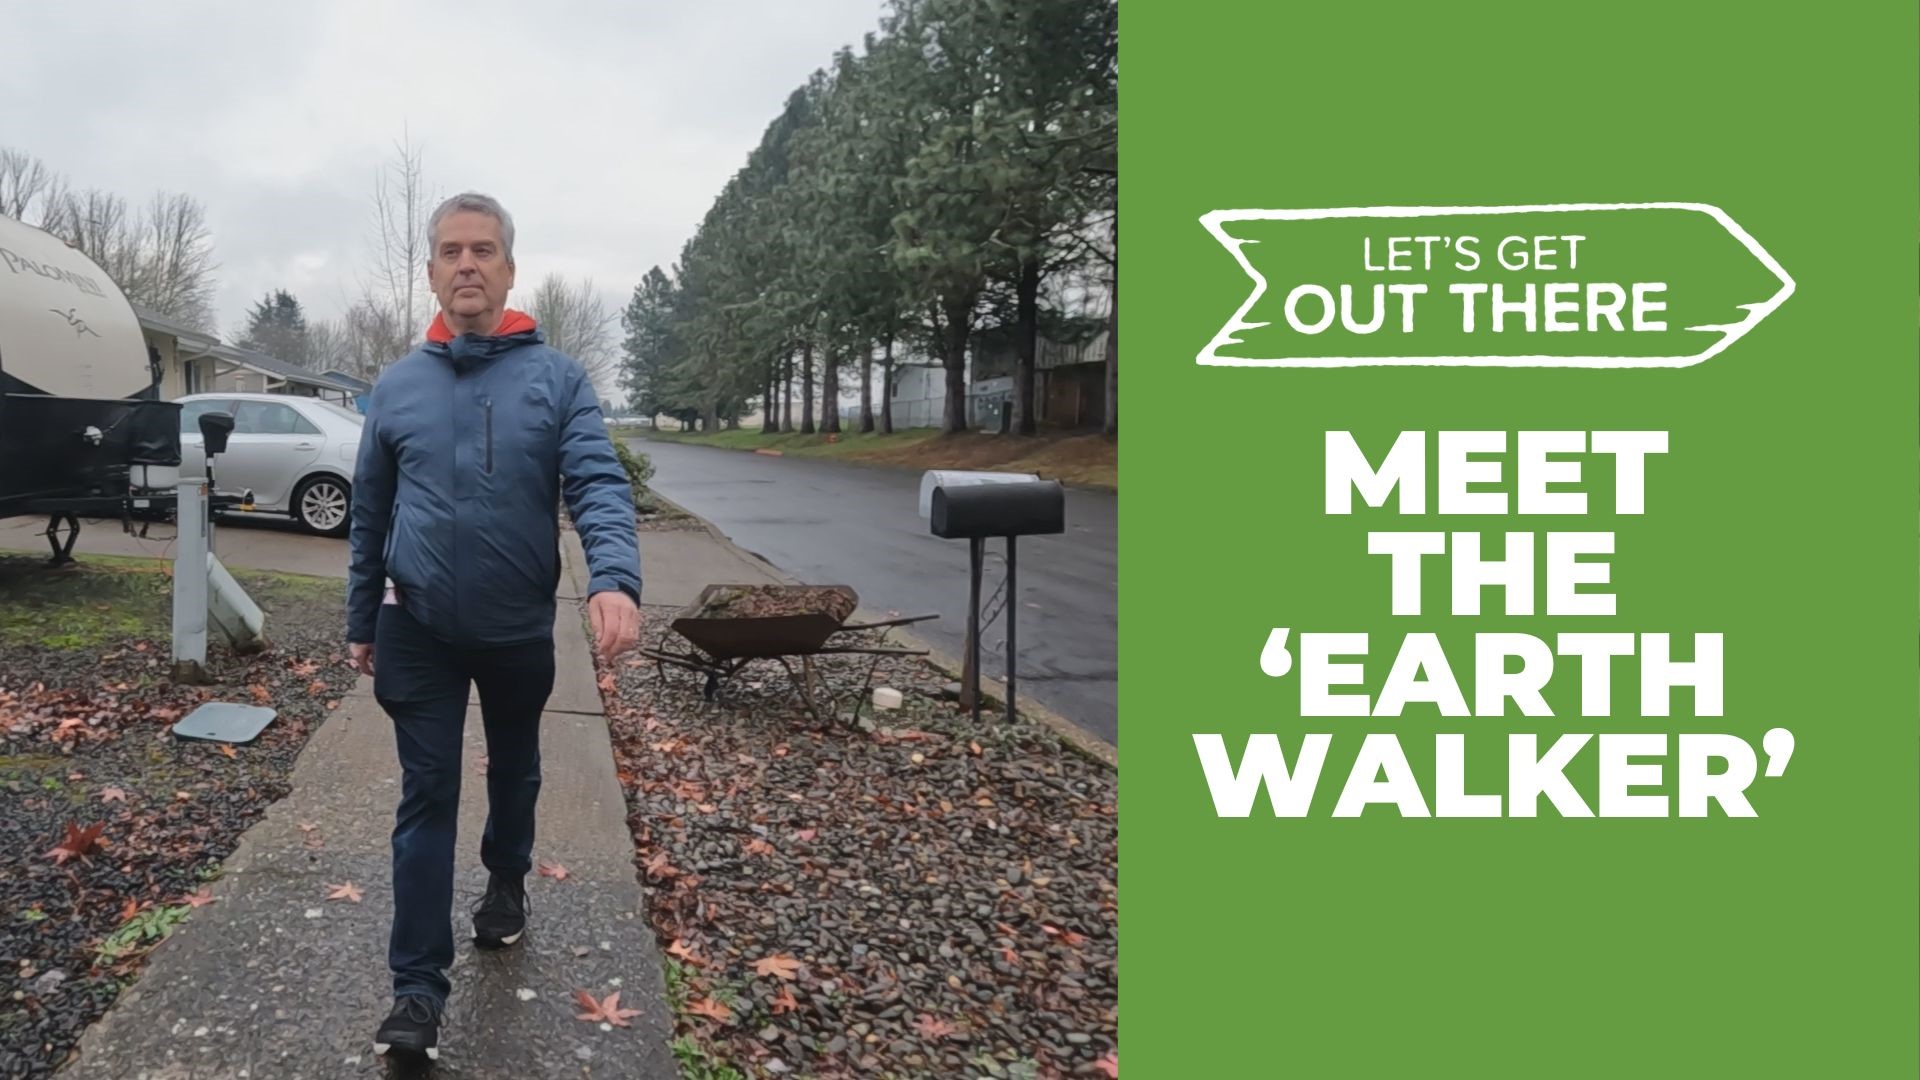 Known as the "Earth Walker" to some of his friends, West Salem's Ed Lazzara has walked over 2,900 miles in almost four years with no signs of stopping.